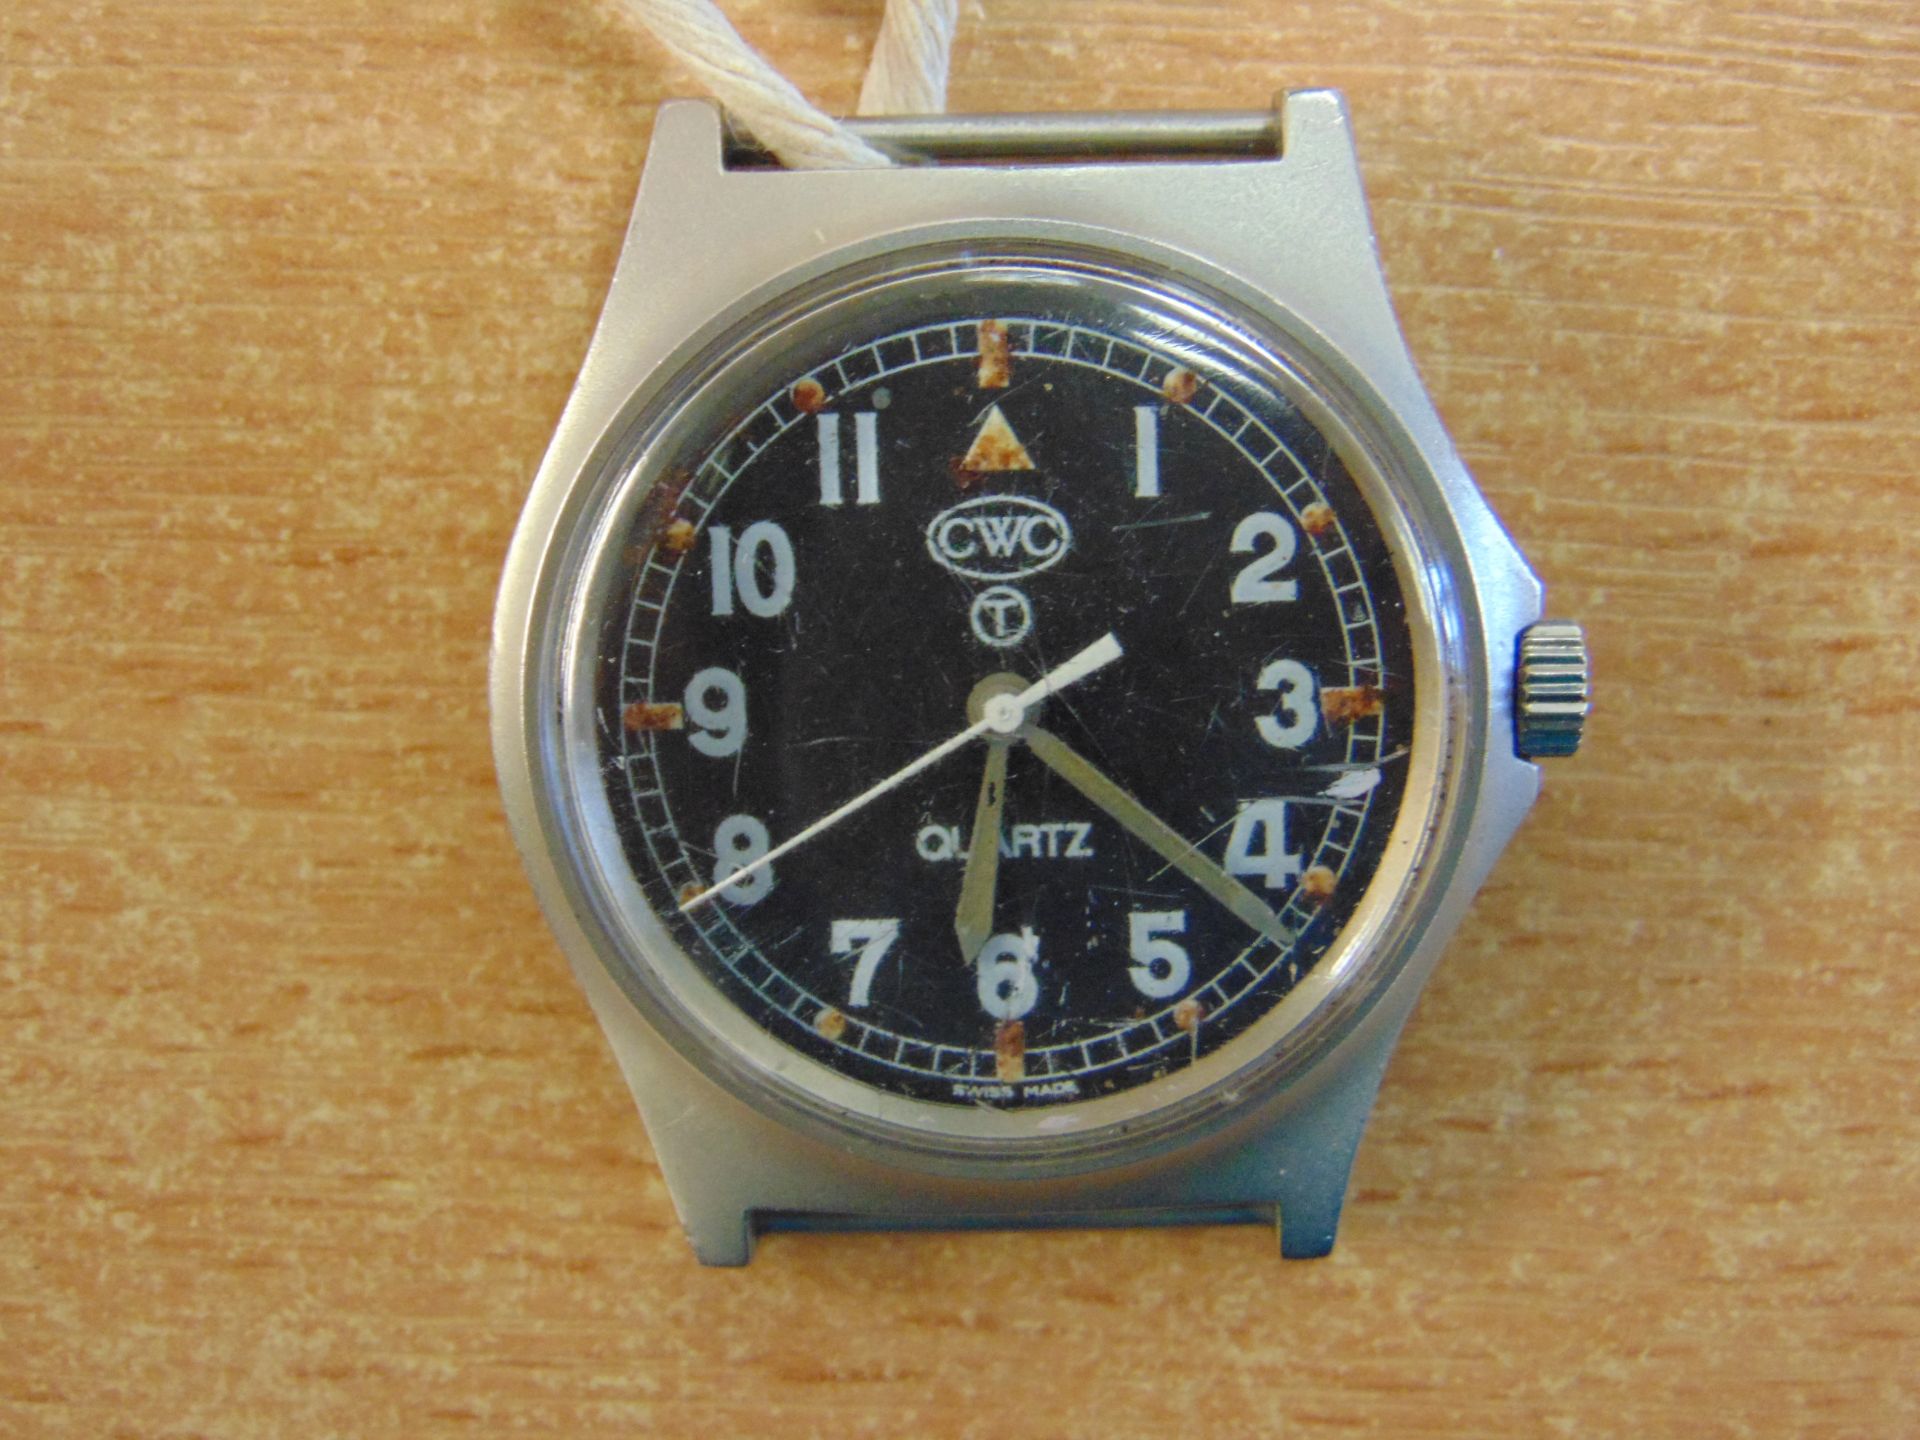 CWC 0552 NAVY/ ROYAL MARINES ISSUE SERVICE WATCH NATO MARKS DATE 1990- GULF WAR - Image 2 of 5